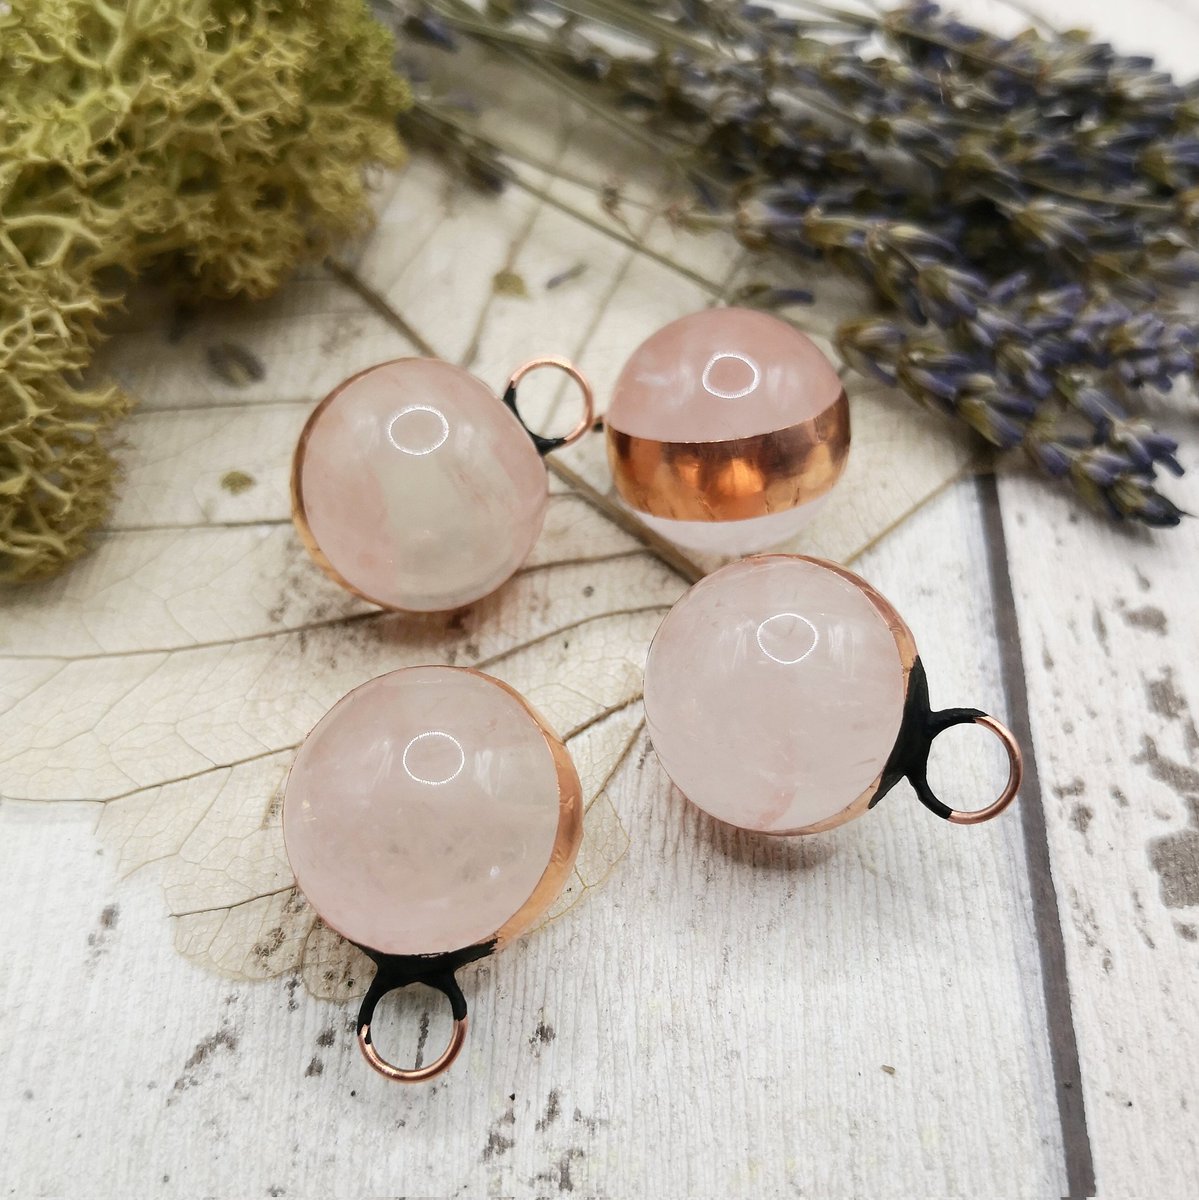 Preparing my quartz orbs ready to be electroformed to create some pendant necklaces.
The copper is on and the conductive paint, next step electroforming, hopefully will be doing this later this week along with a few other items.
#wip #workinprogress #copper #copperjewelry